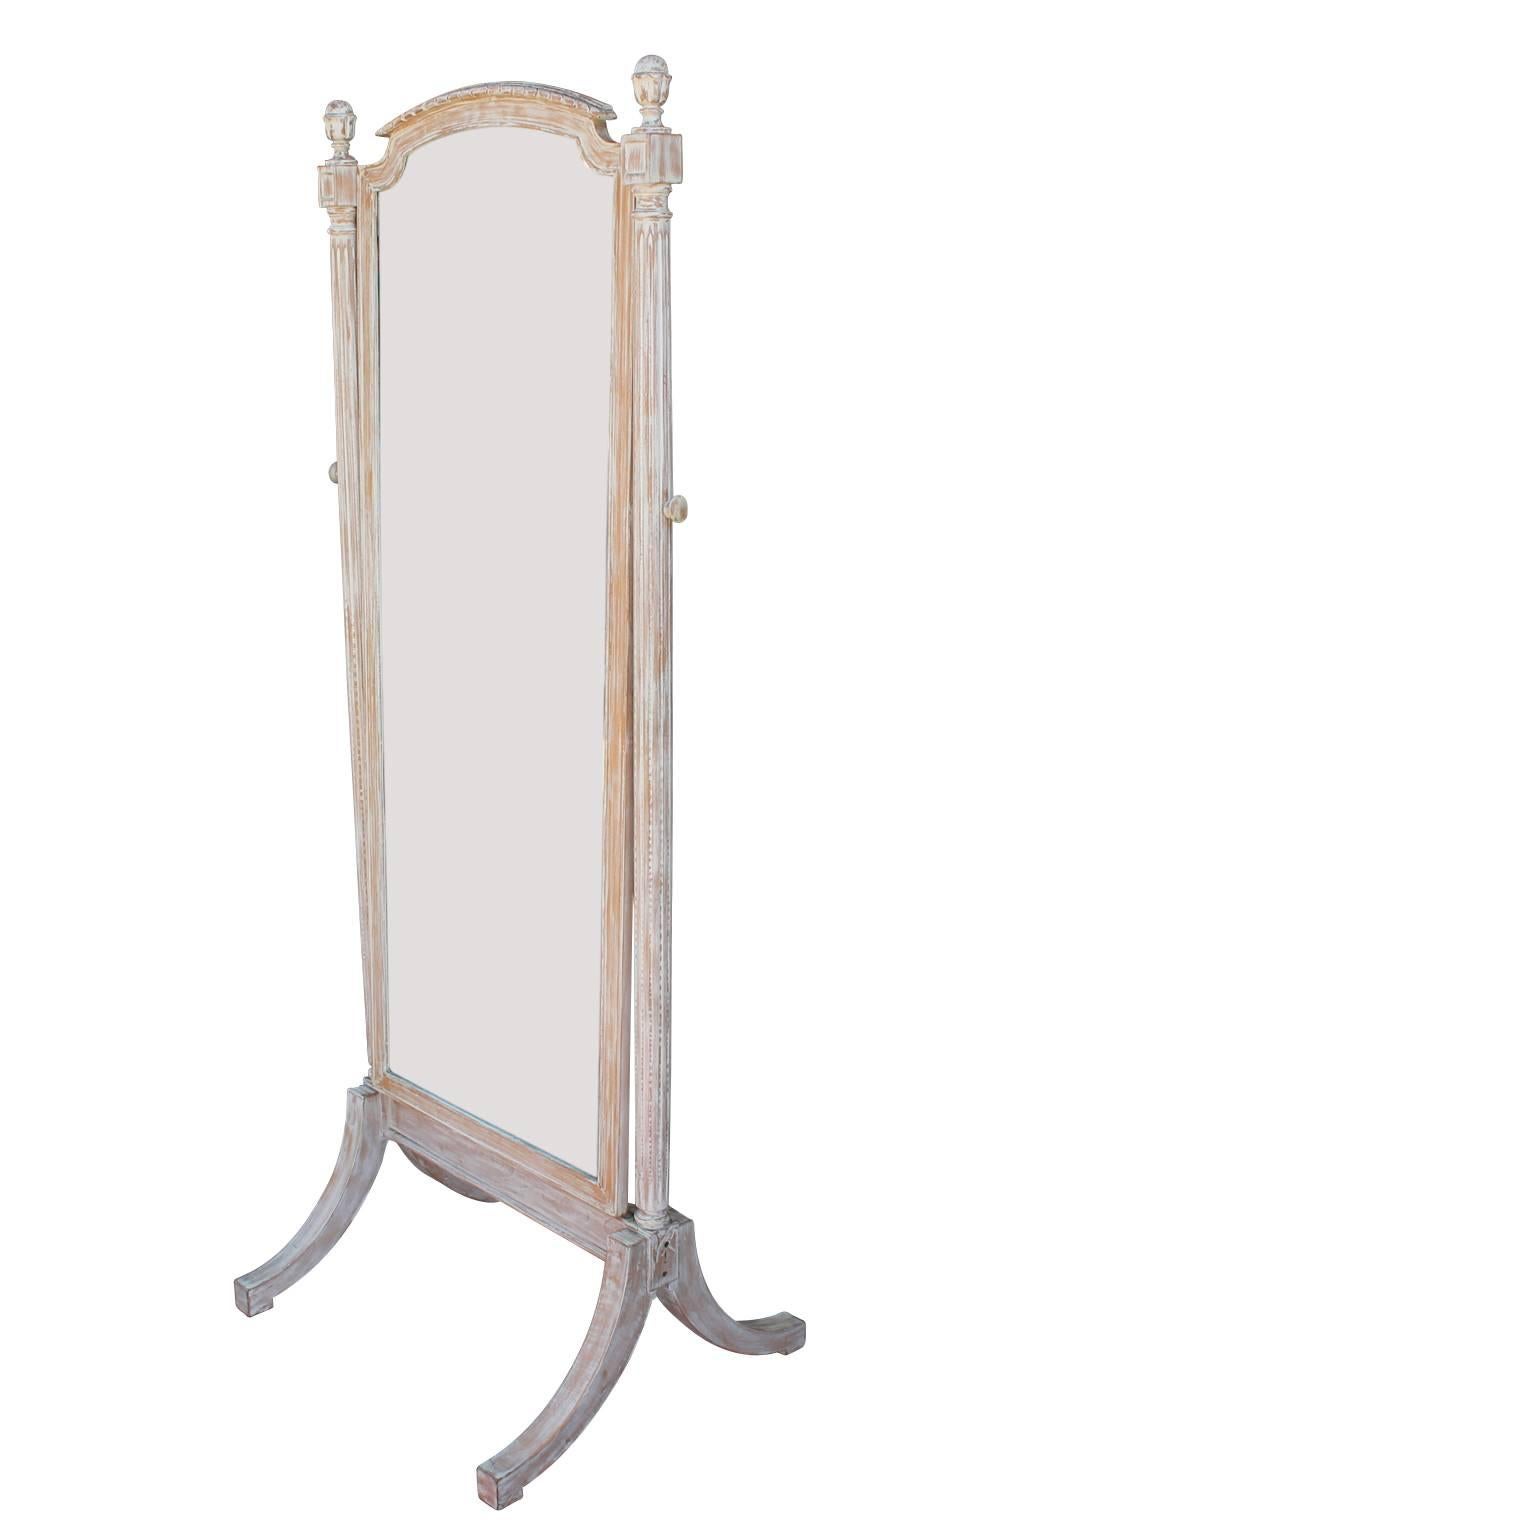 Stunning free-standing floor mirror with a simple yet decadent frame.